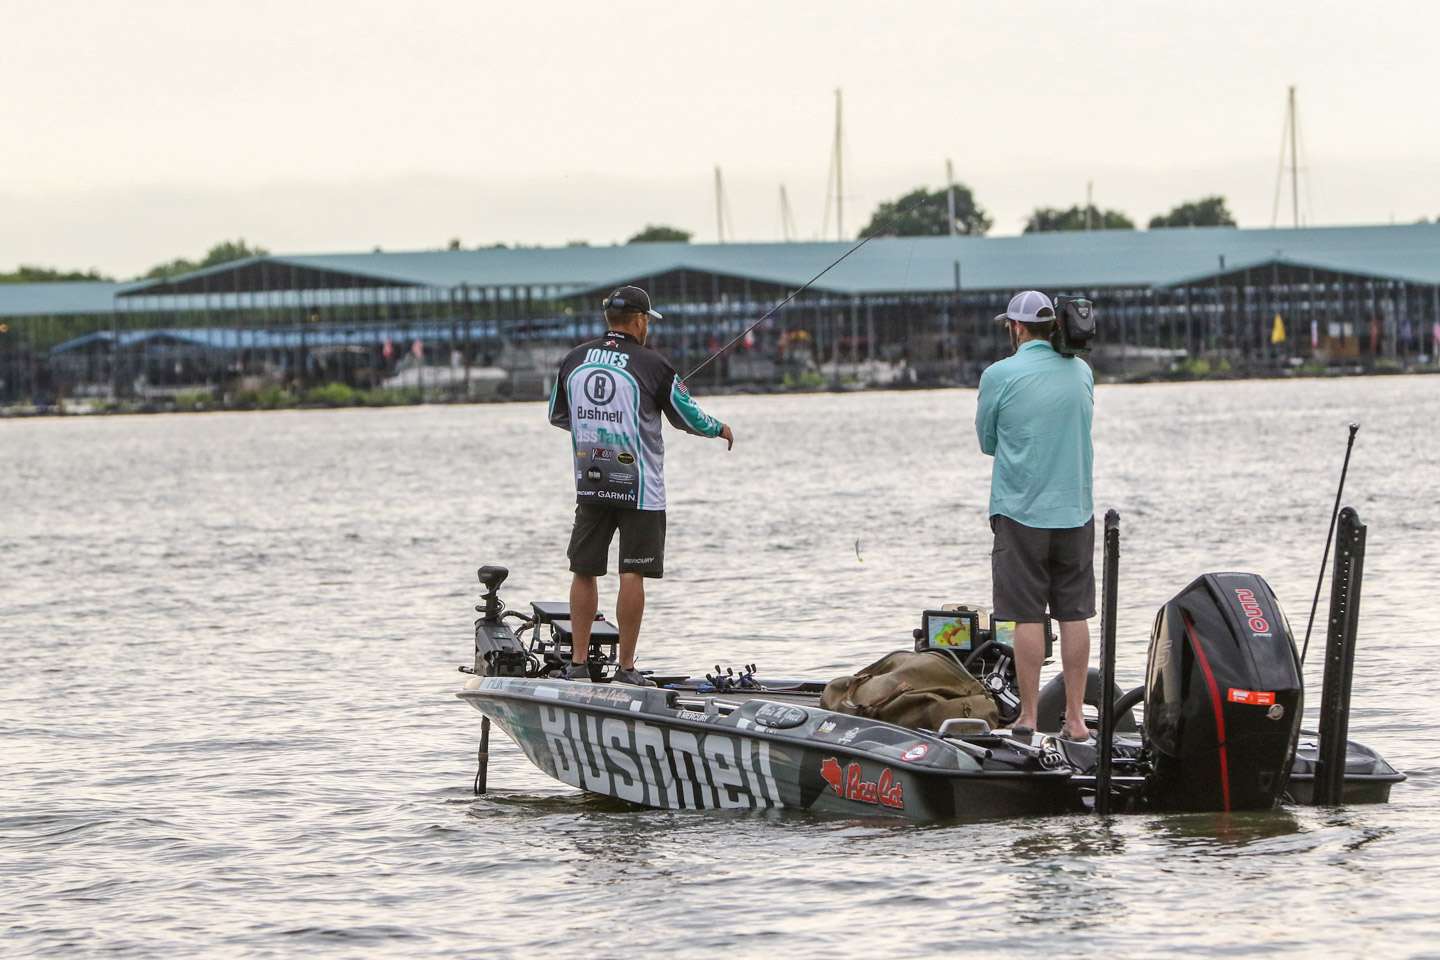 Catch up with Opens angler Chris Jones as he takes on Day 2 of 2021 Academy Sports + Outdoors Bassmaster Classic presented by Huk!